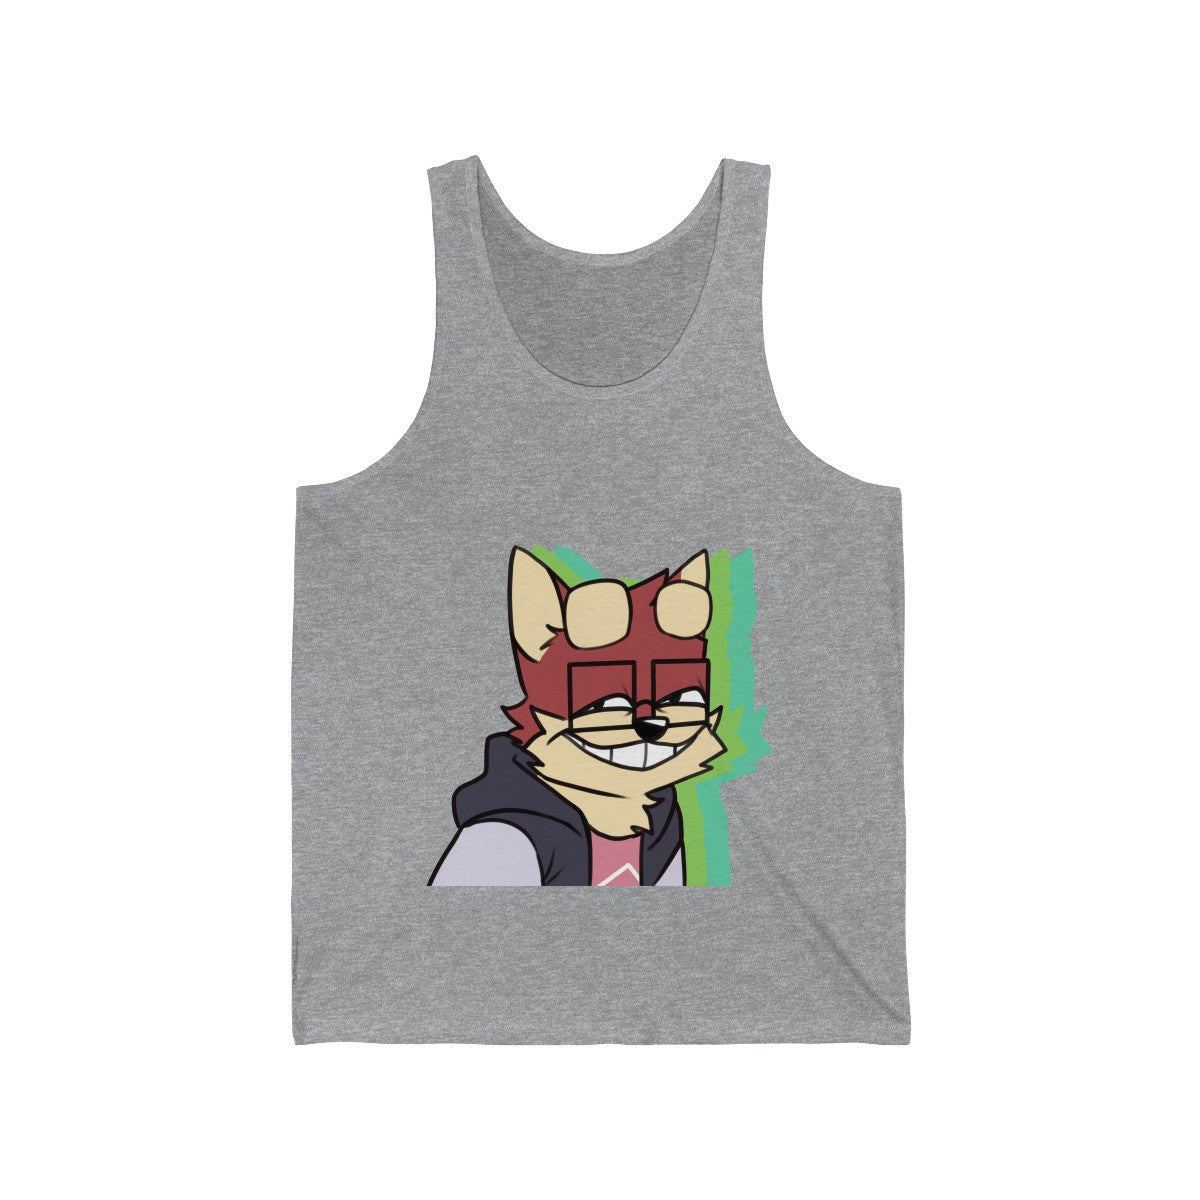 Thinking About You - Tank Top Tank Top Ooka Heather XS 